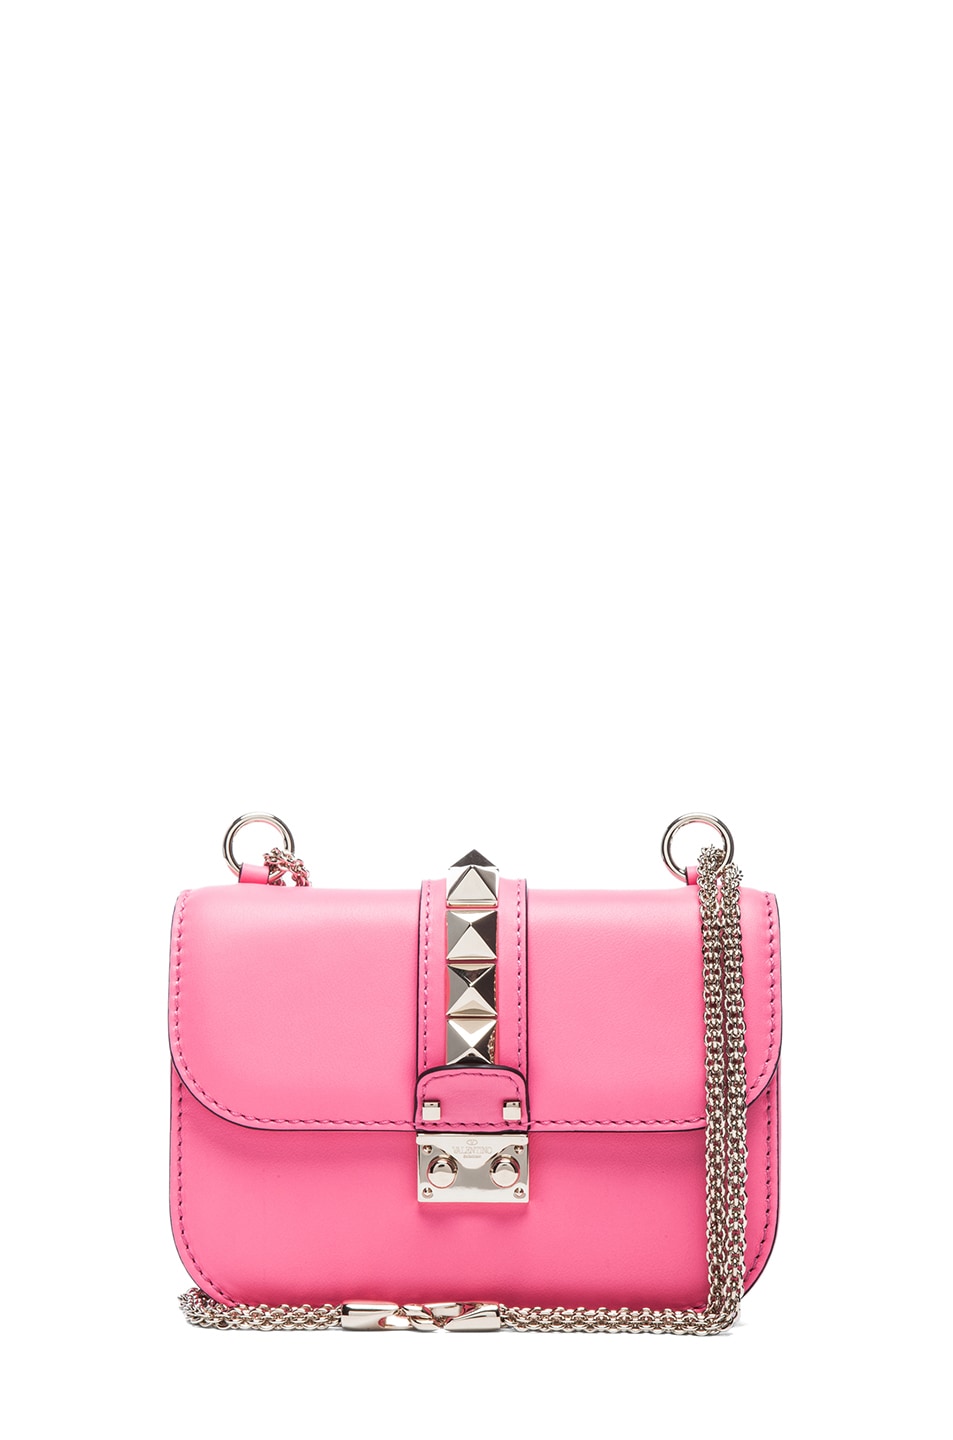 Valentino Small Lock Flap Bag in Fluorescent Pink | FWRD